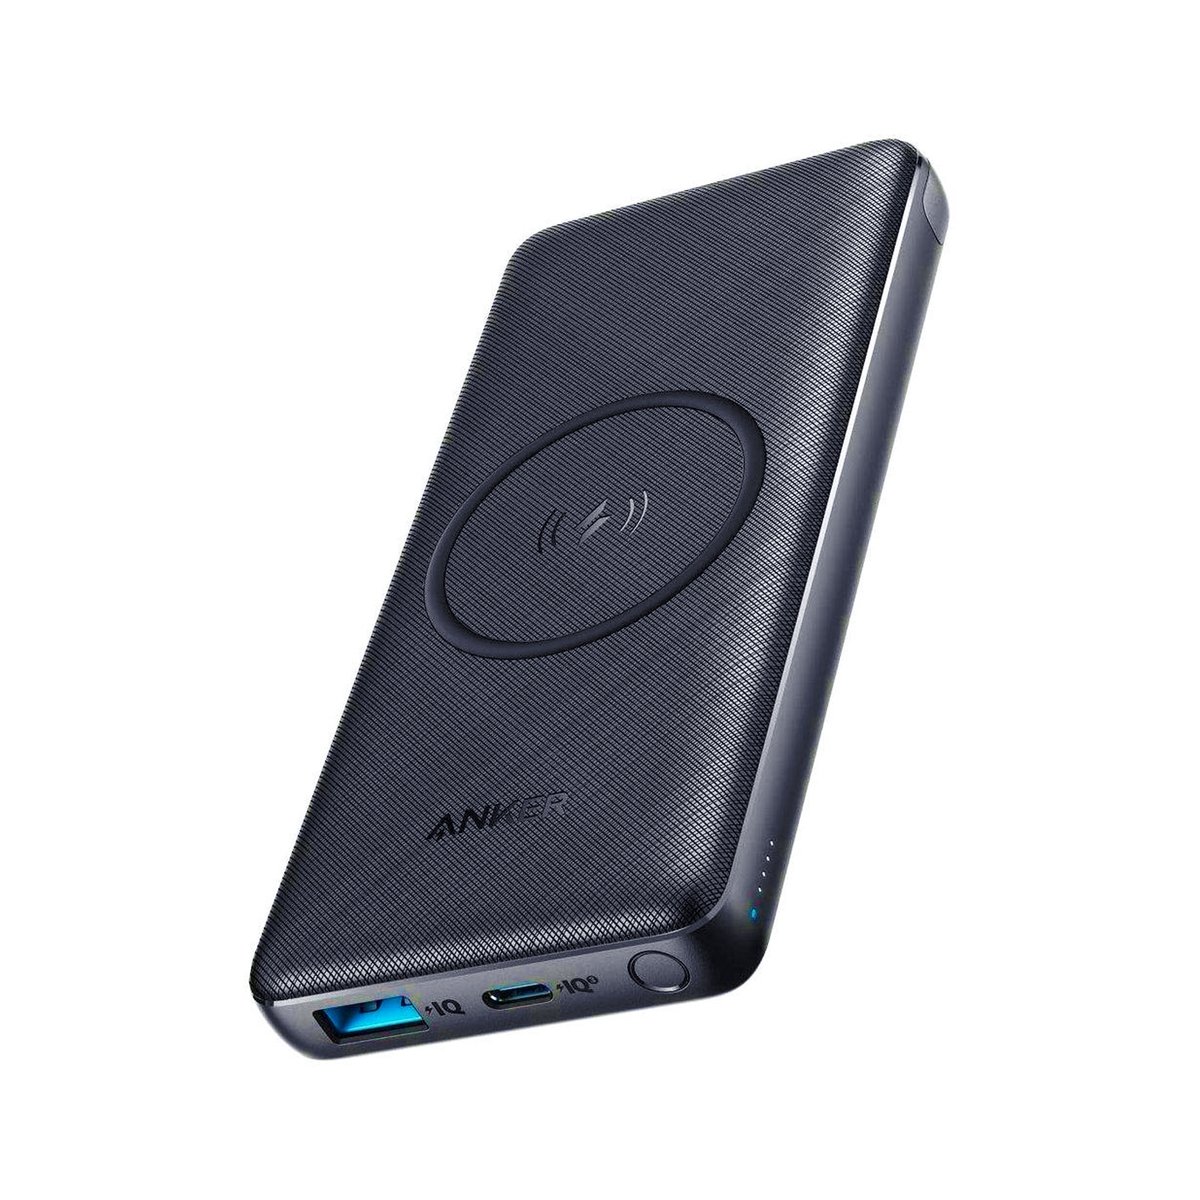 Anker 5000 mAh Wireless Power Bank Price in India - Buy Anker 5000 mAh  Wireless Power Bank online at